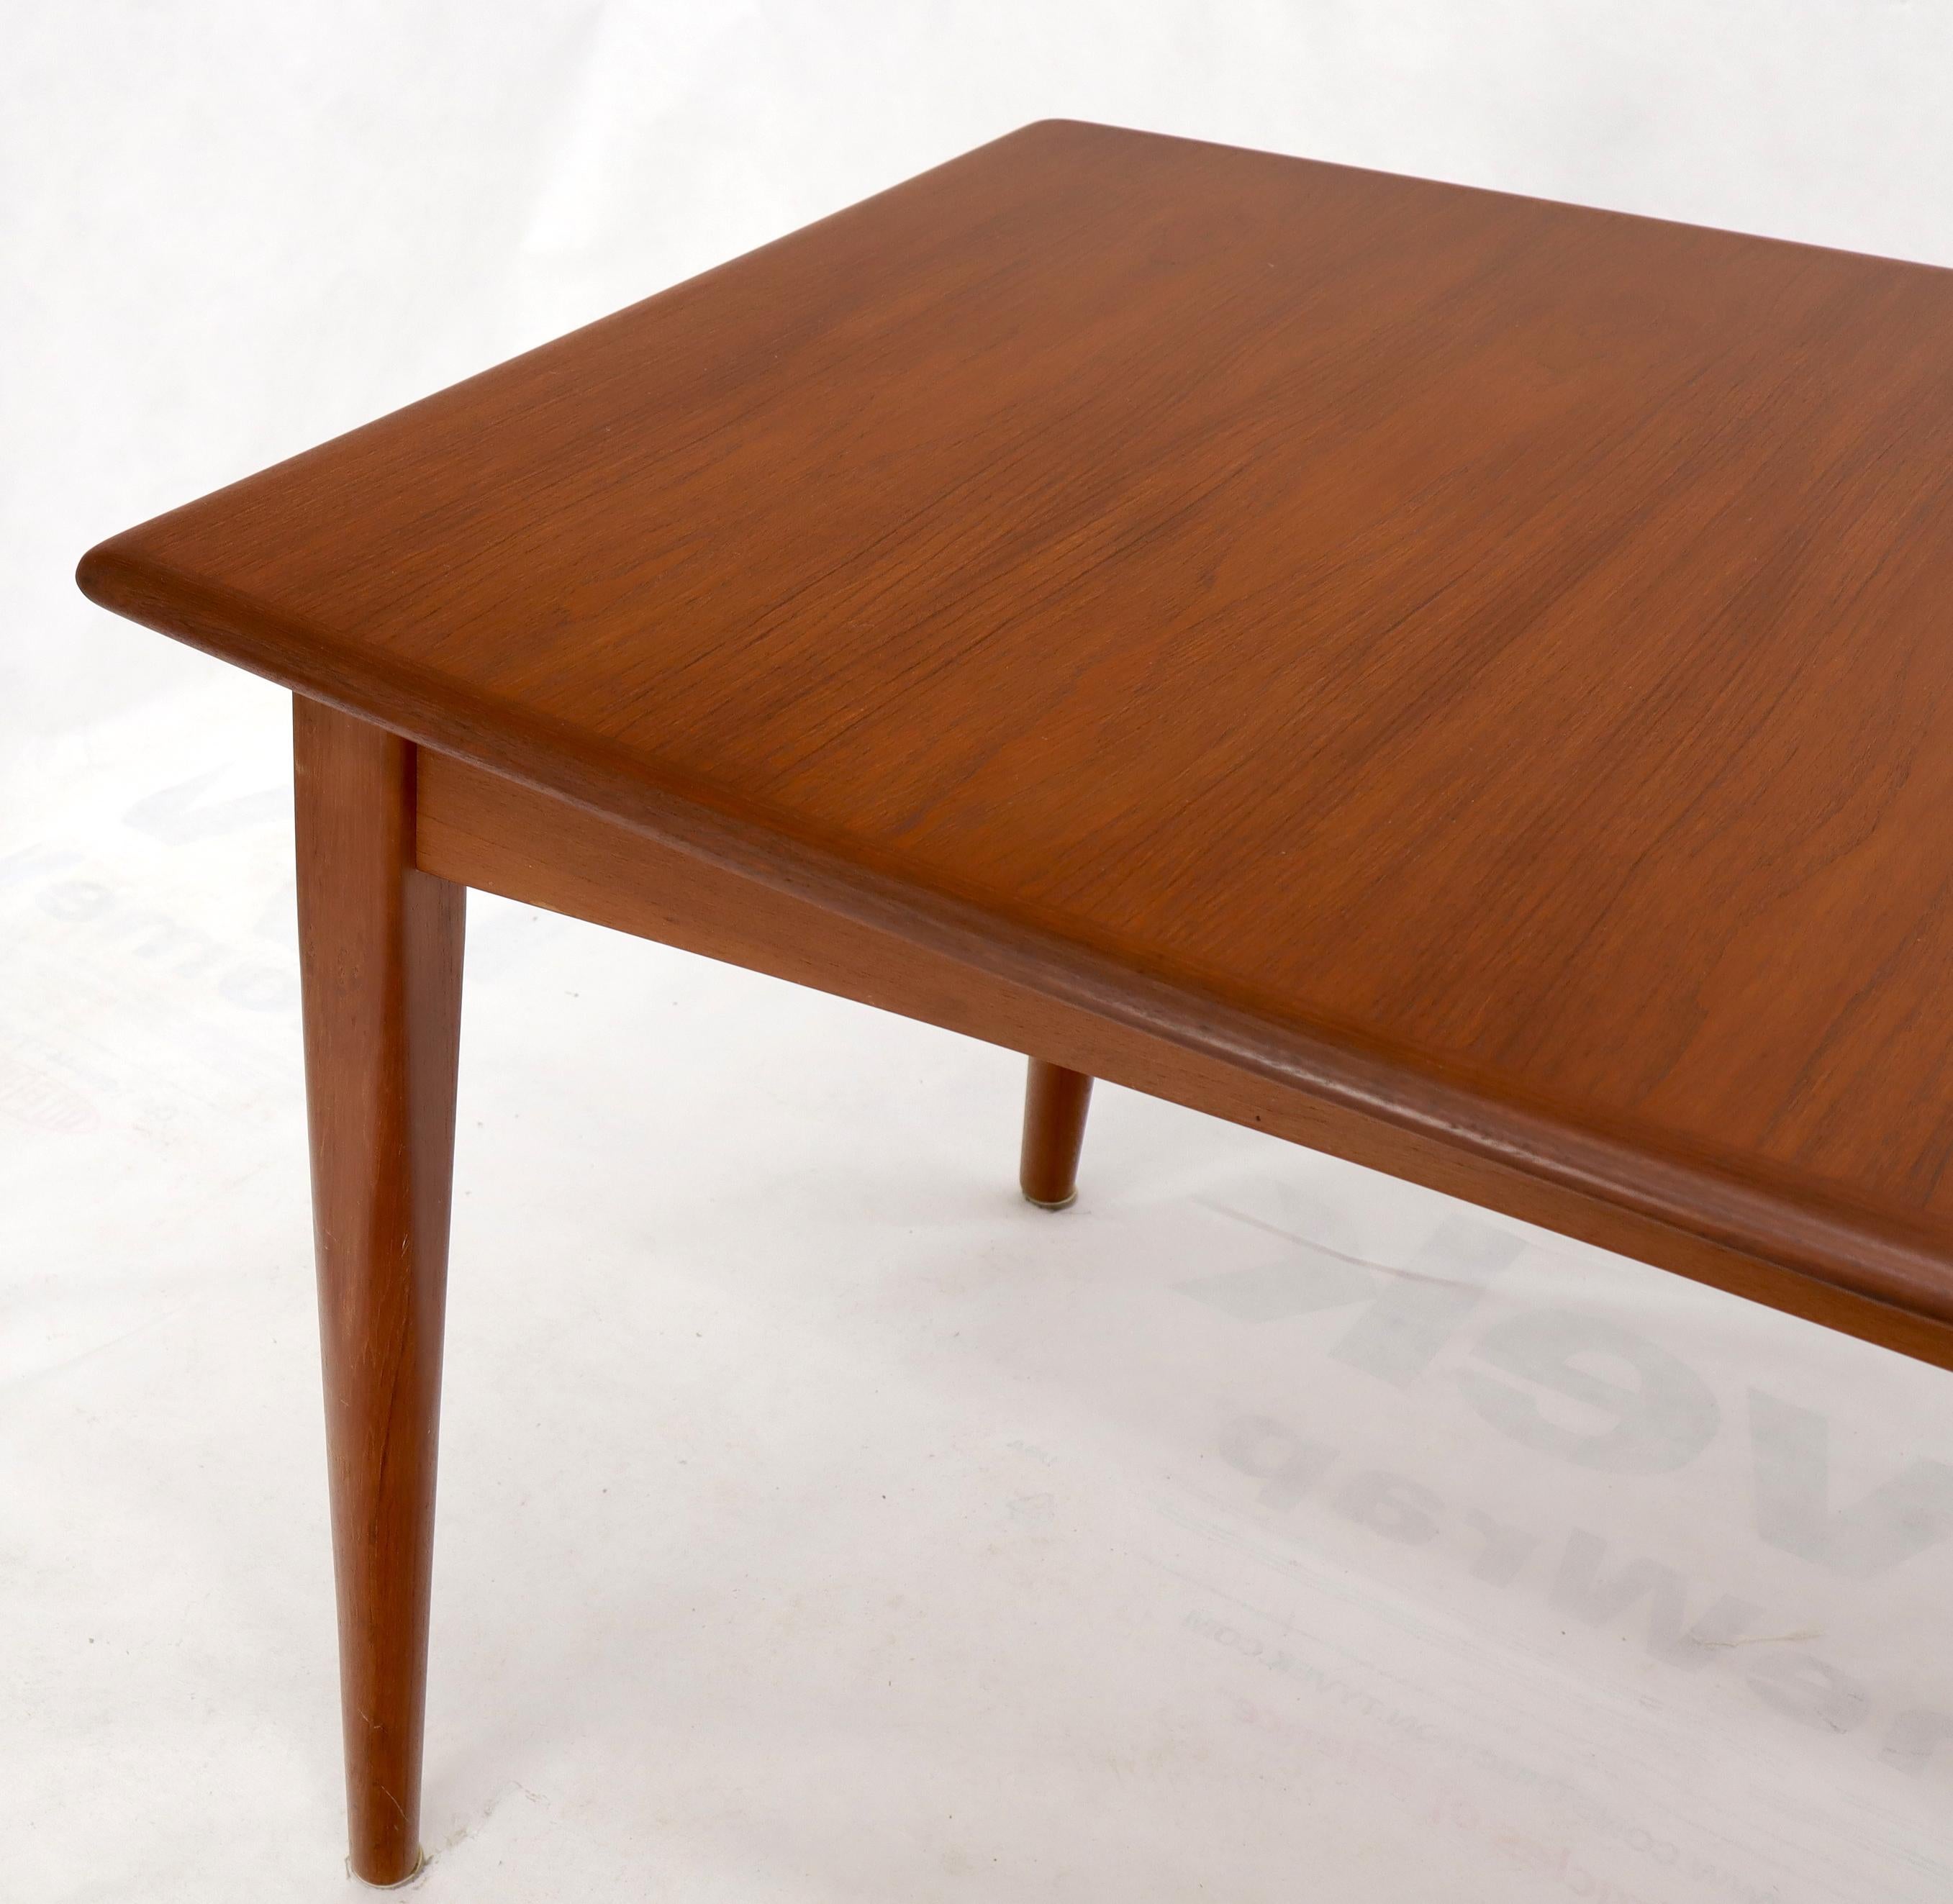 Danish Mid-Century Modern Teak Dining Table with Two Pop Up Self Storing Leaves For Sale 4